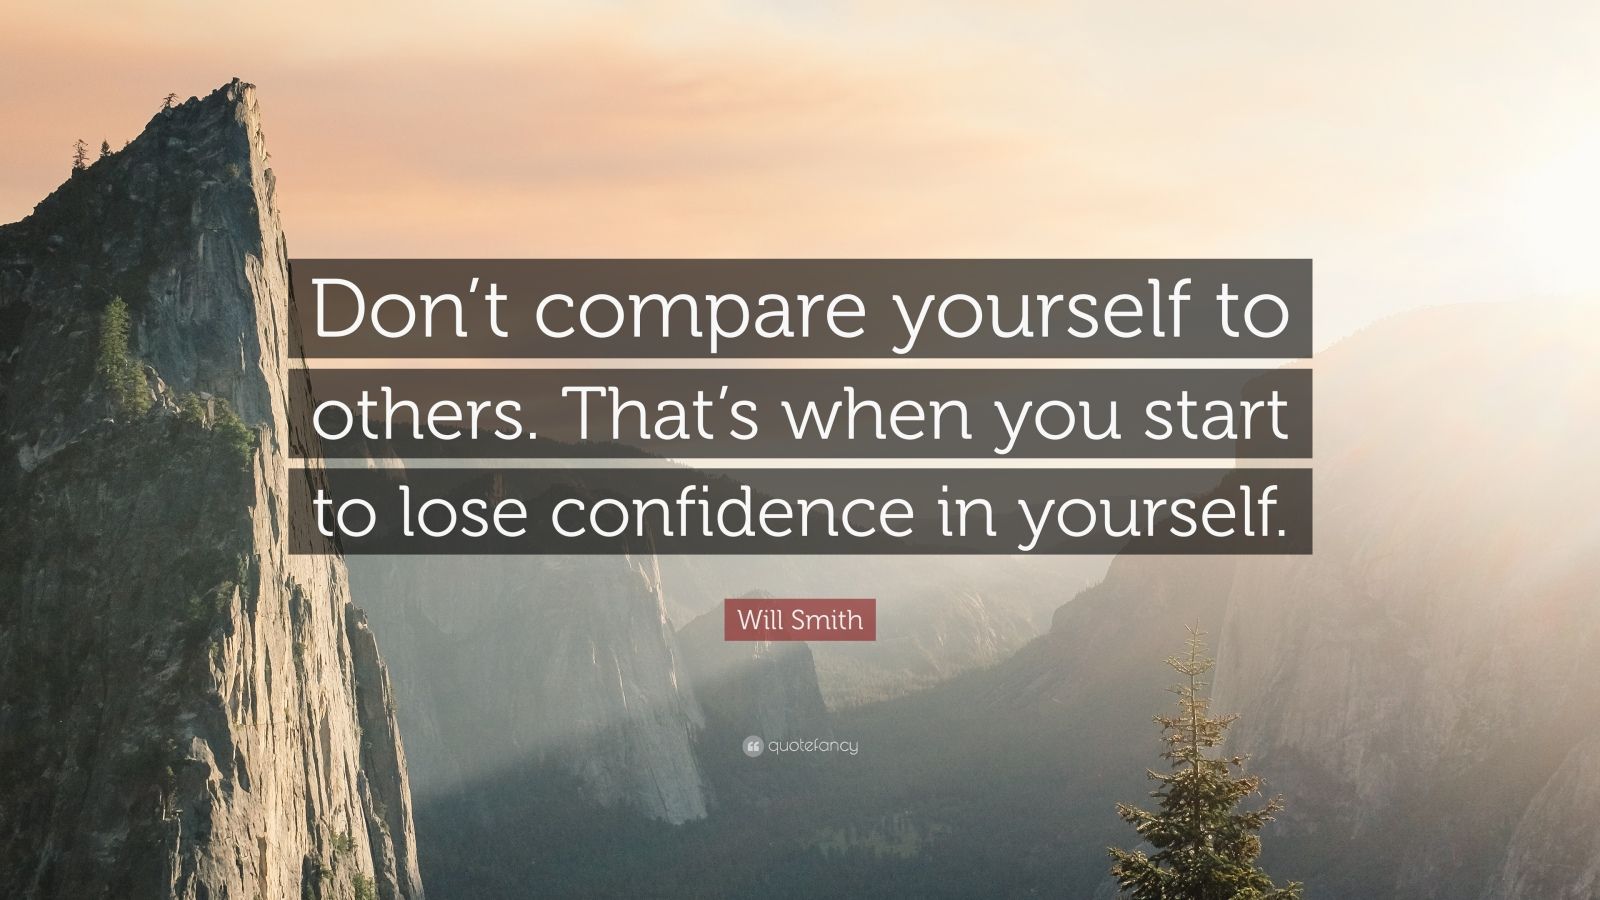 Will Smith Quote “Don’t compare yourself to others. That